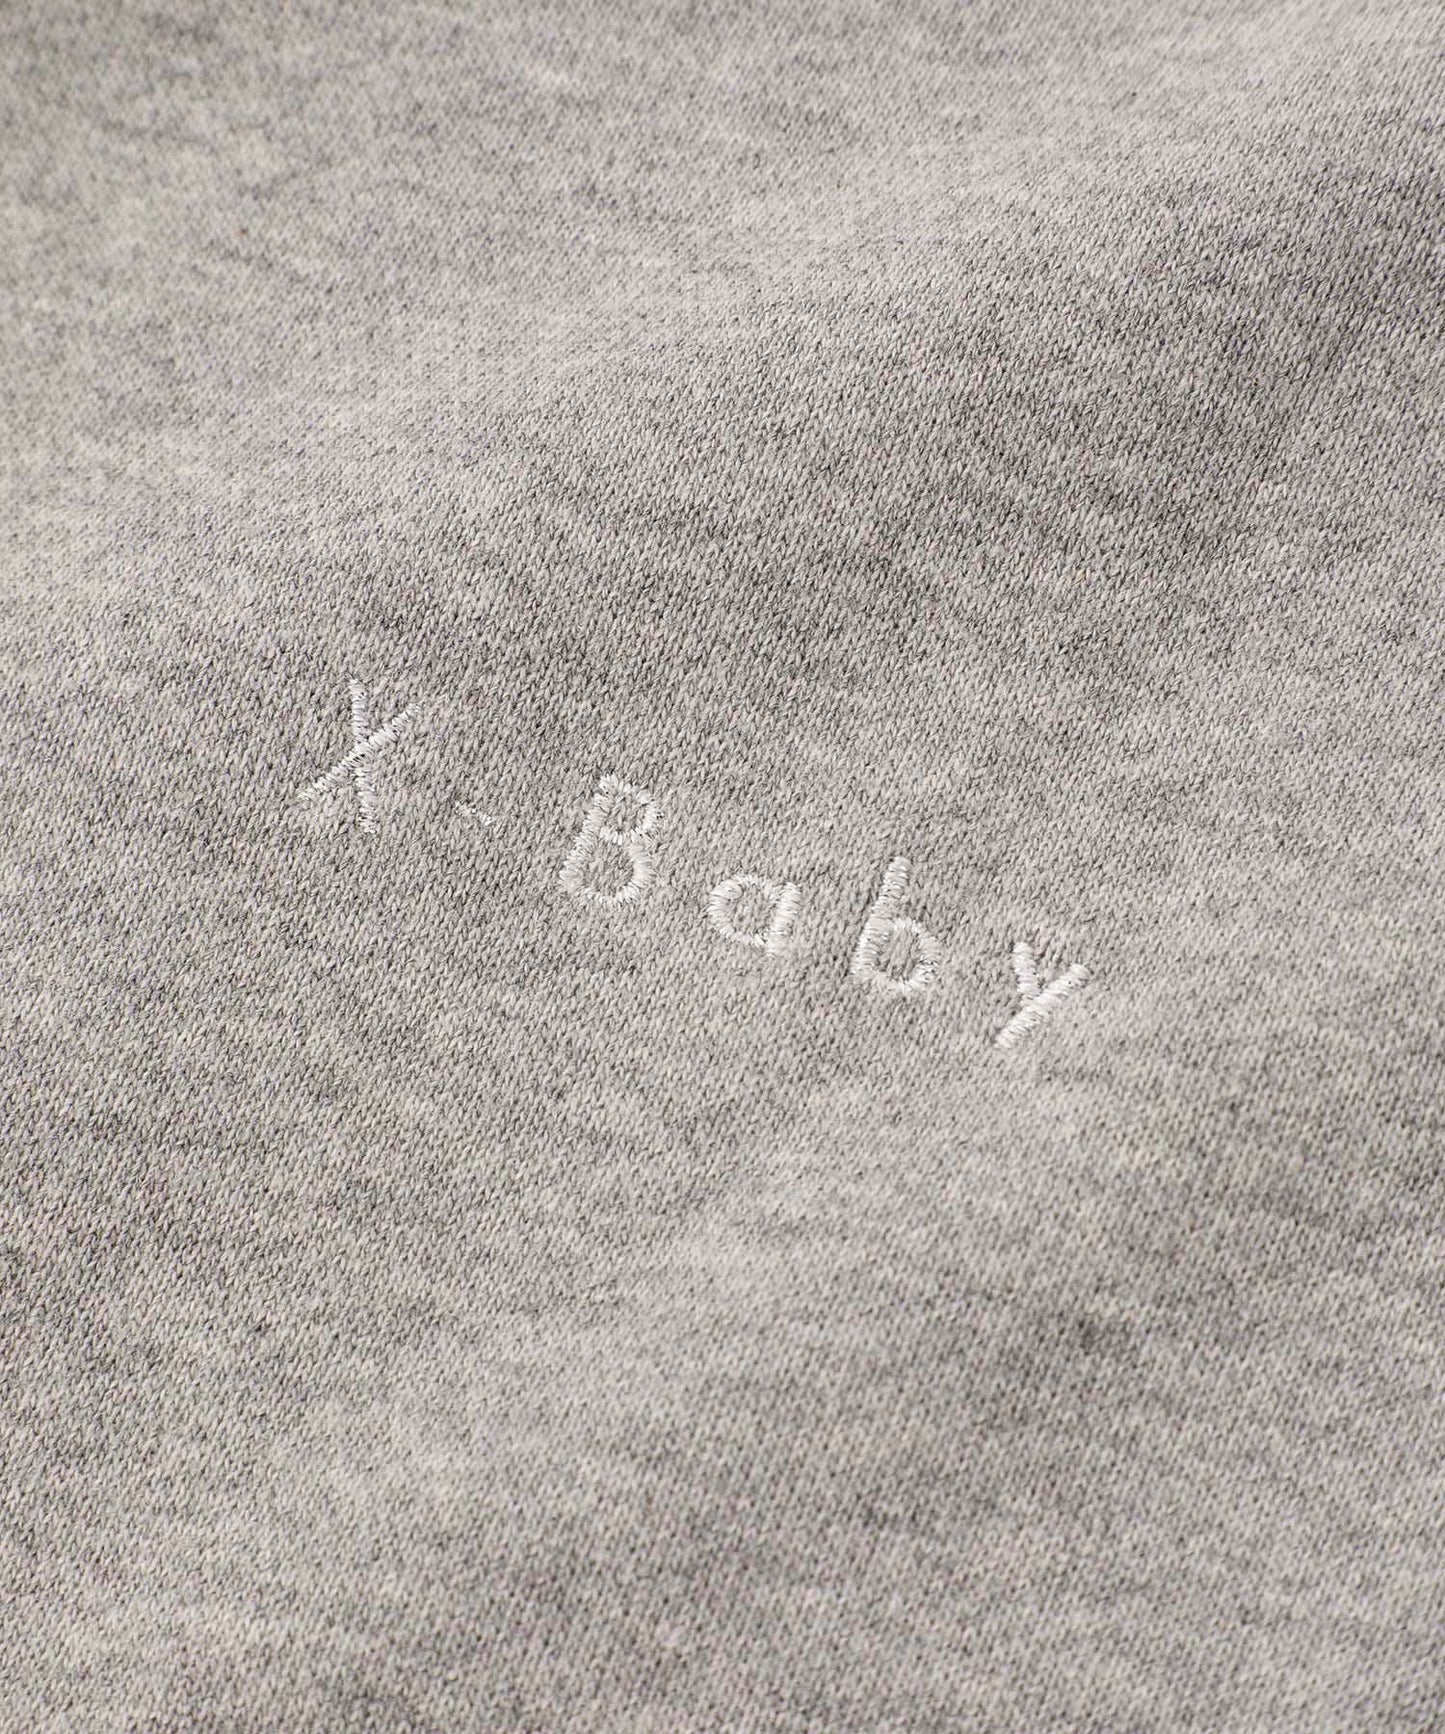 X-baby CROPPED CREW SWEAT TOP